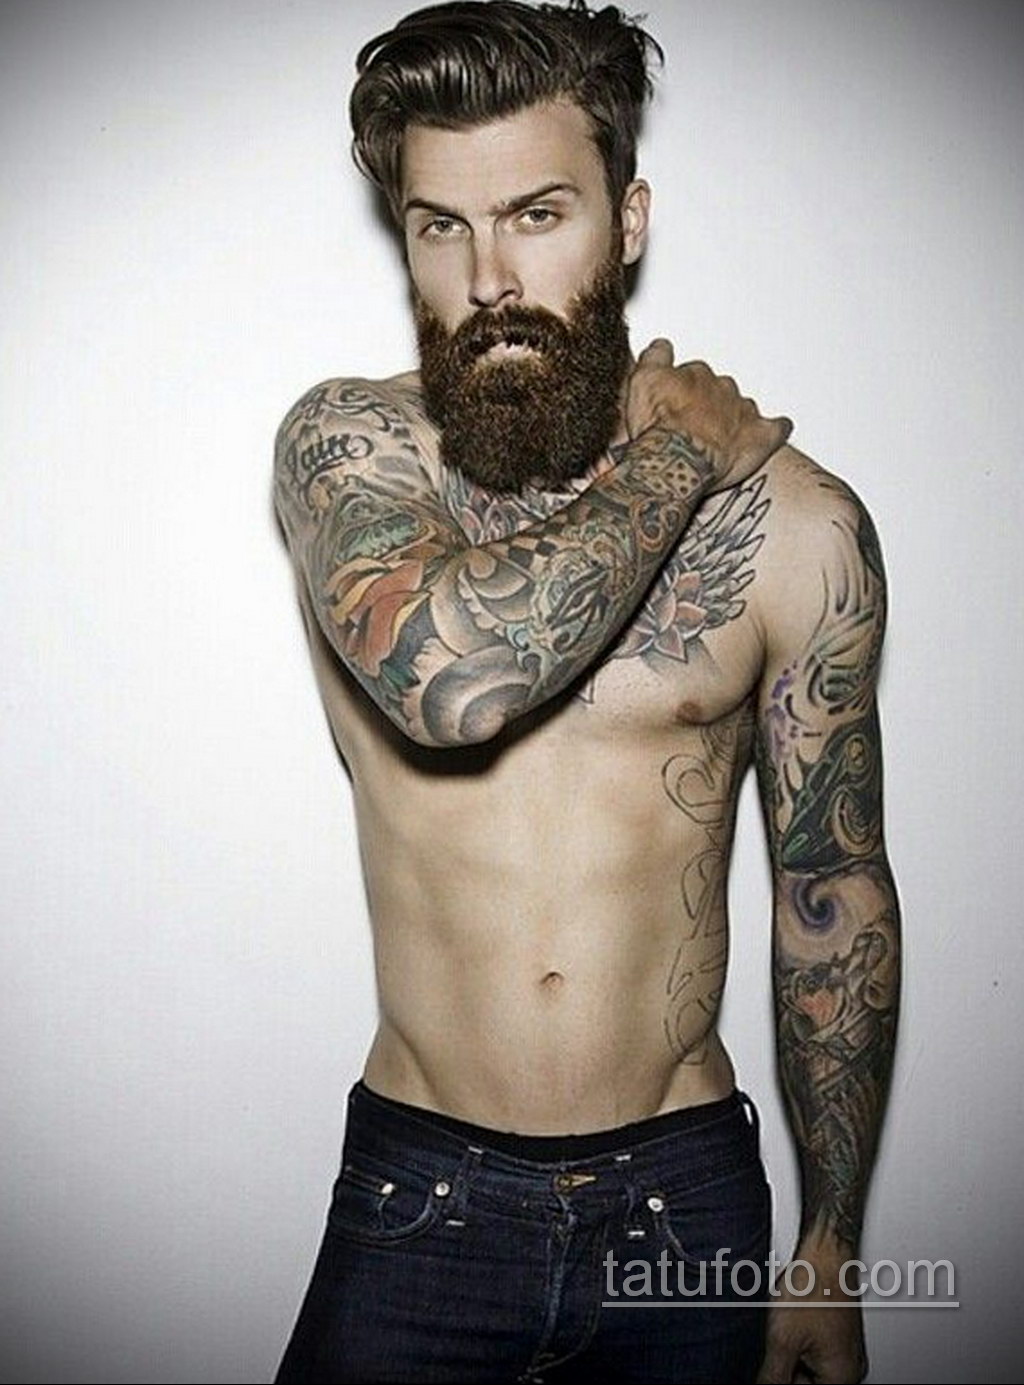 Male models with tattoos and beards